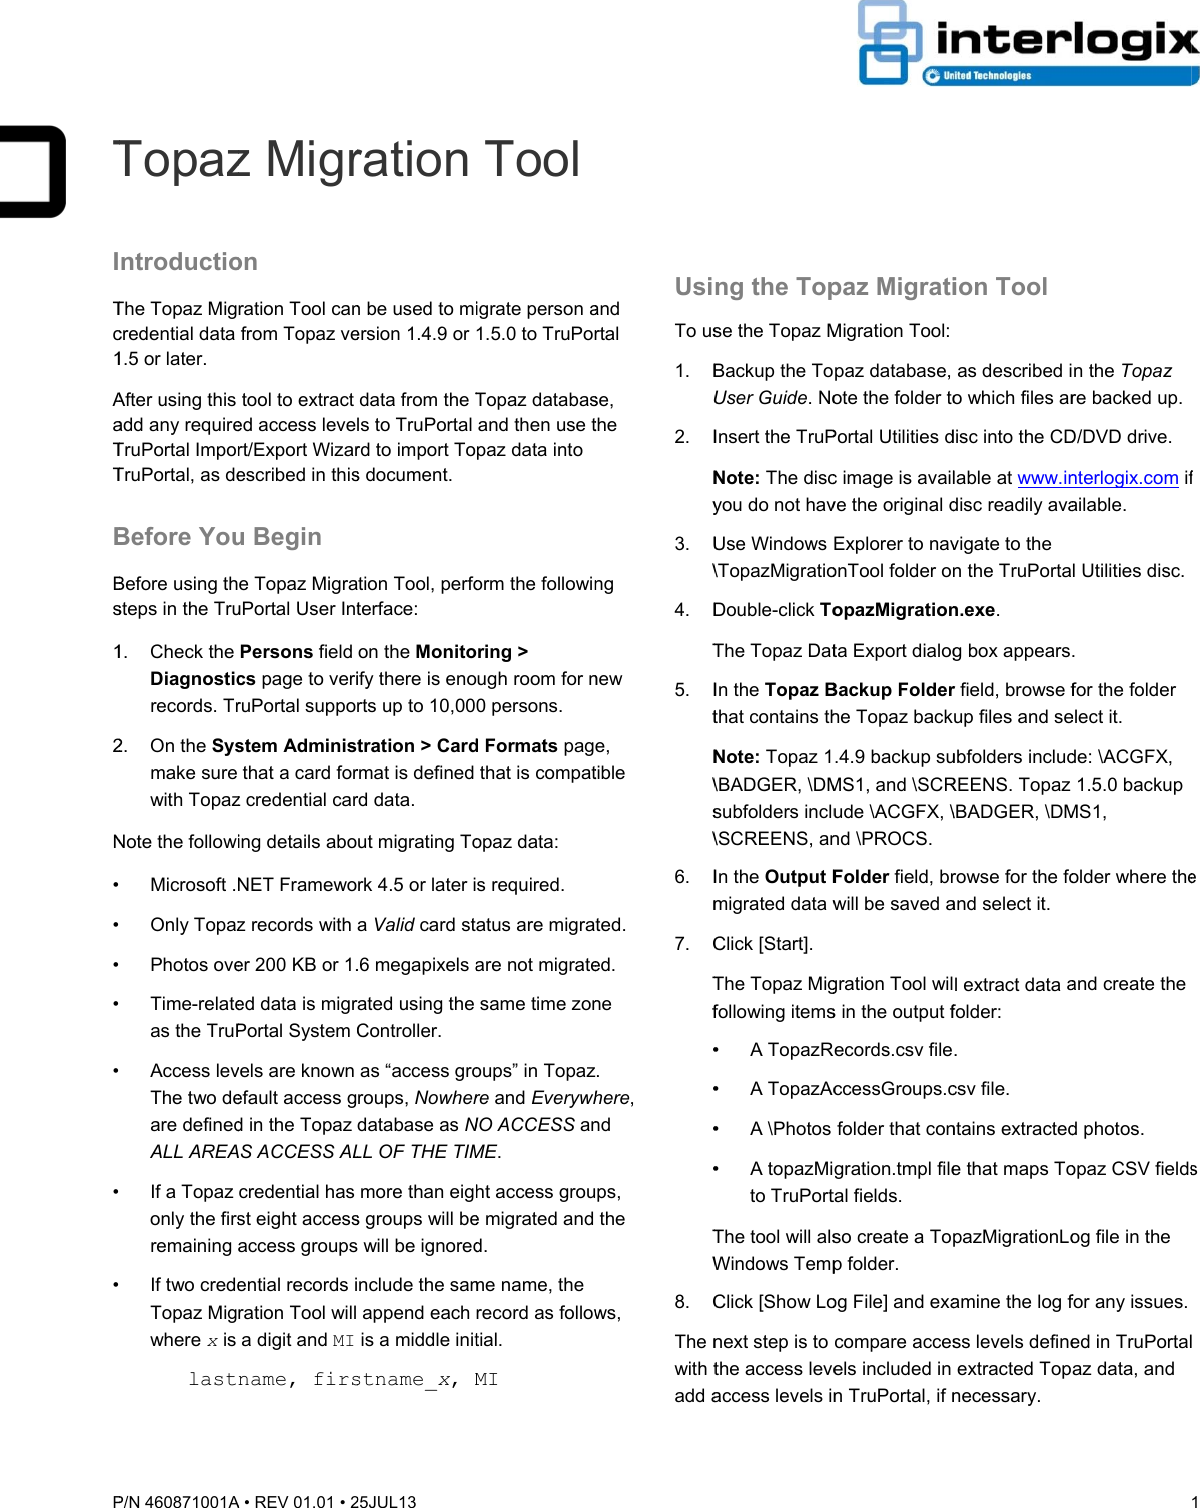 Page 1 of 2 - Topaz Migration Tool Reference